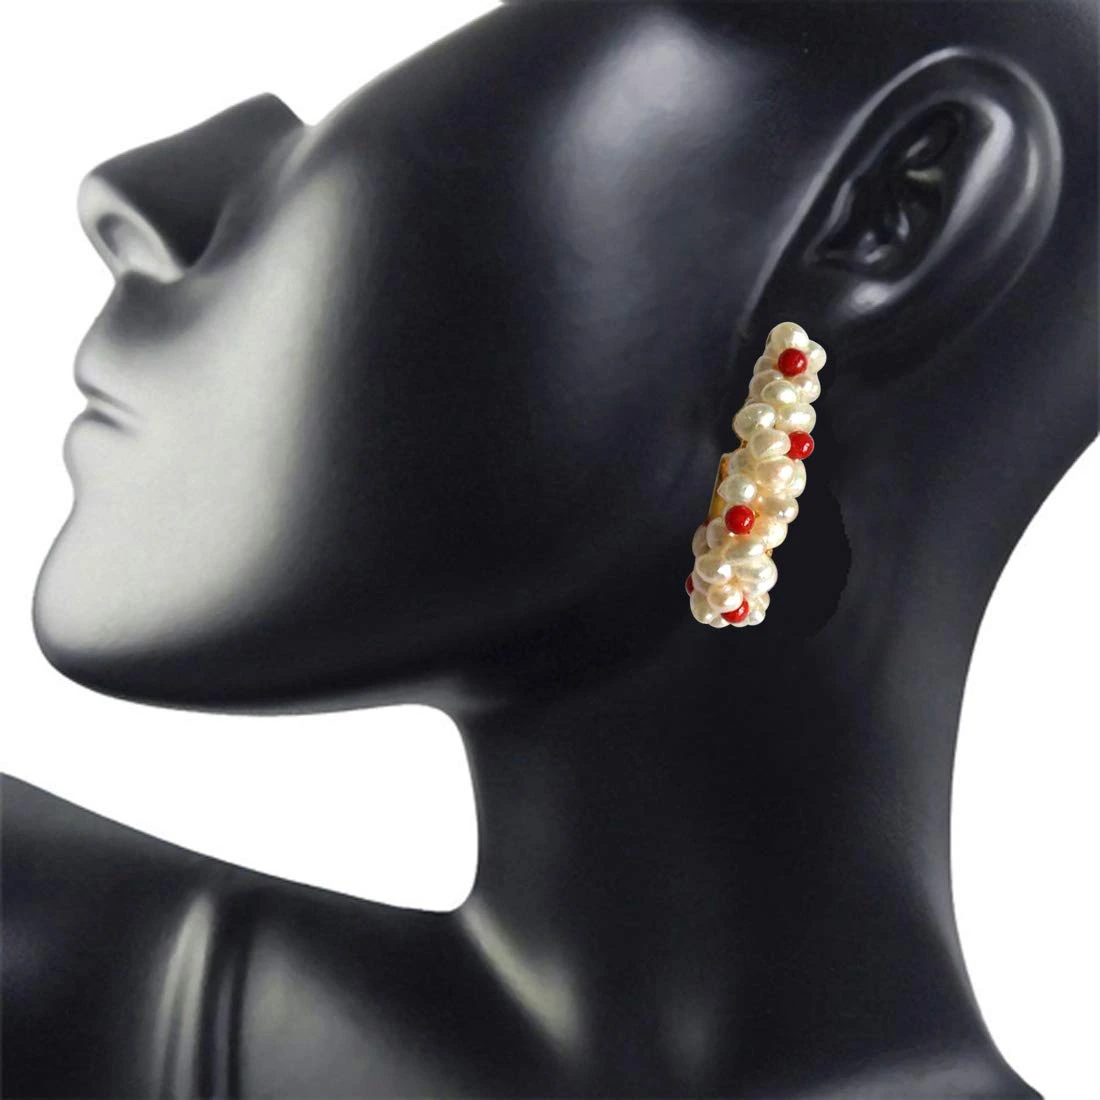 Charming Bali - Real Freshwater Pearl & Red Coral Twisted Bali Style Earrings for Women (SE28)